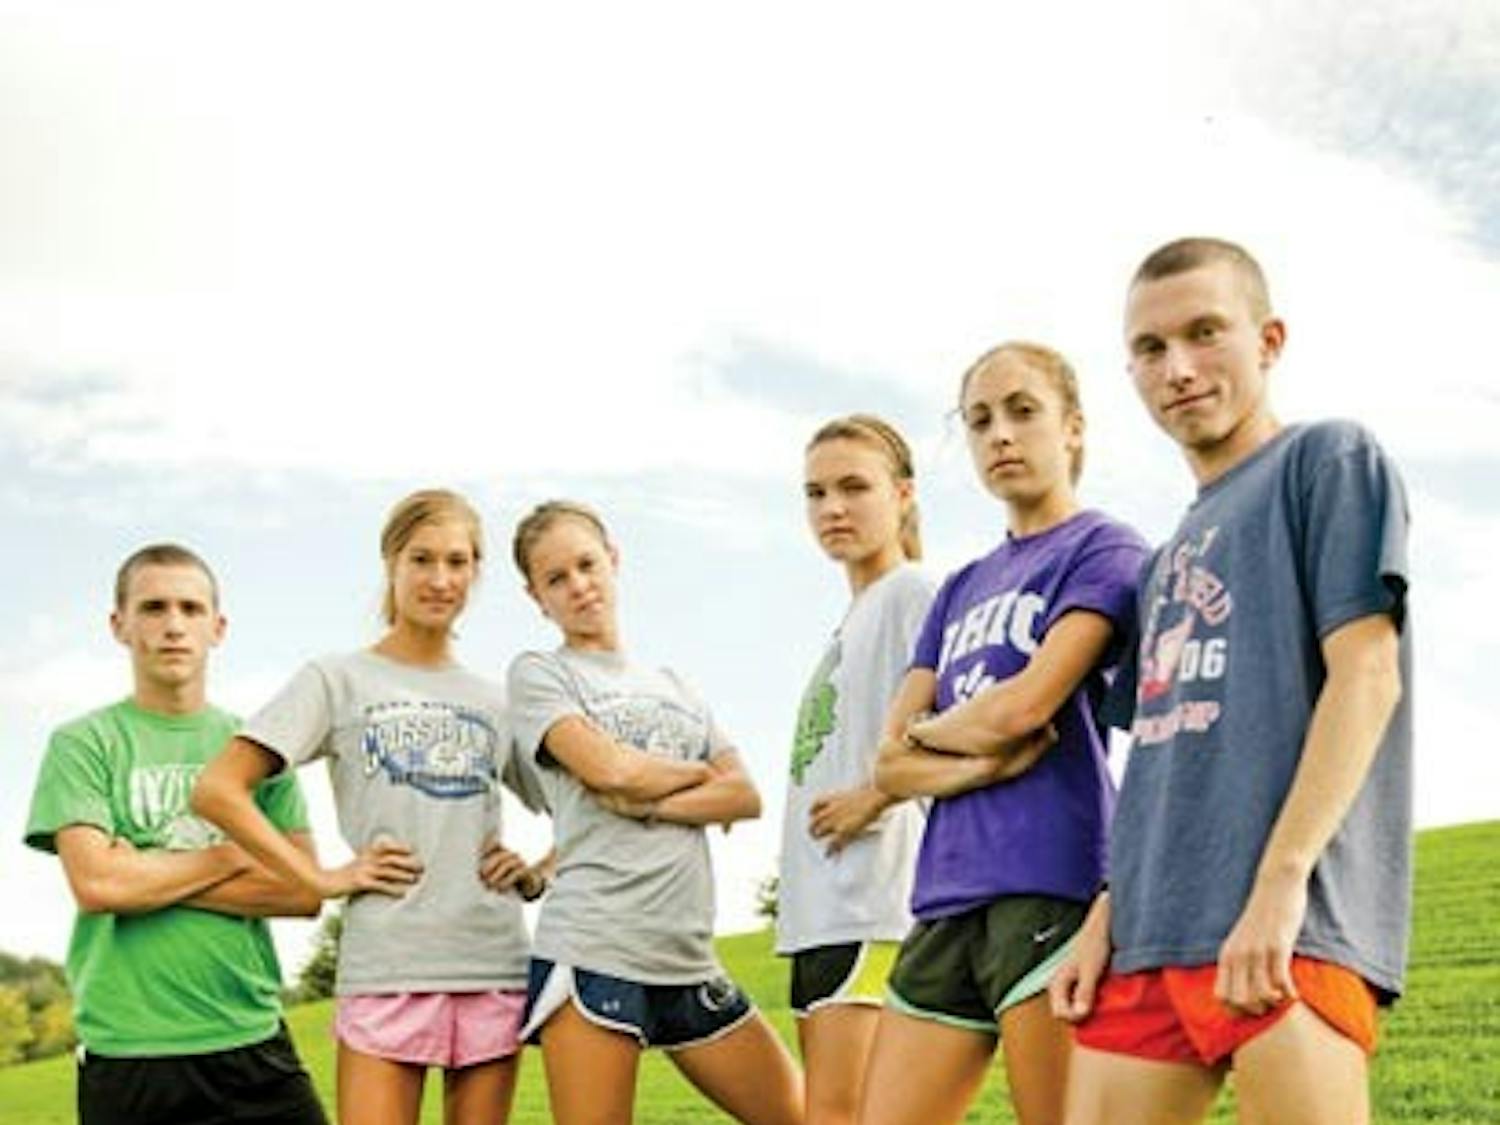 Cross Country: Speedy sophomores send competition running  